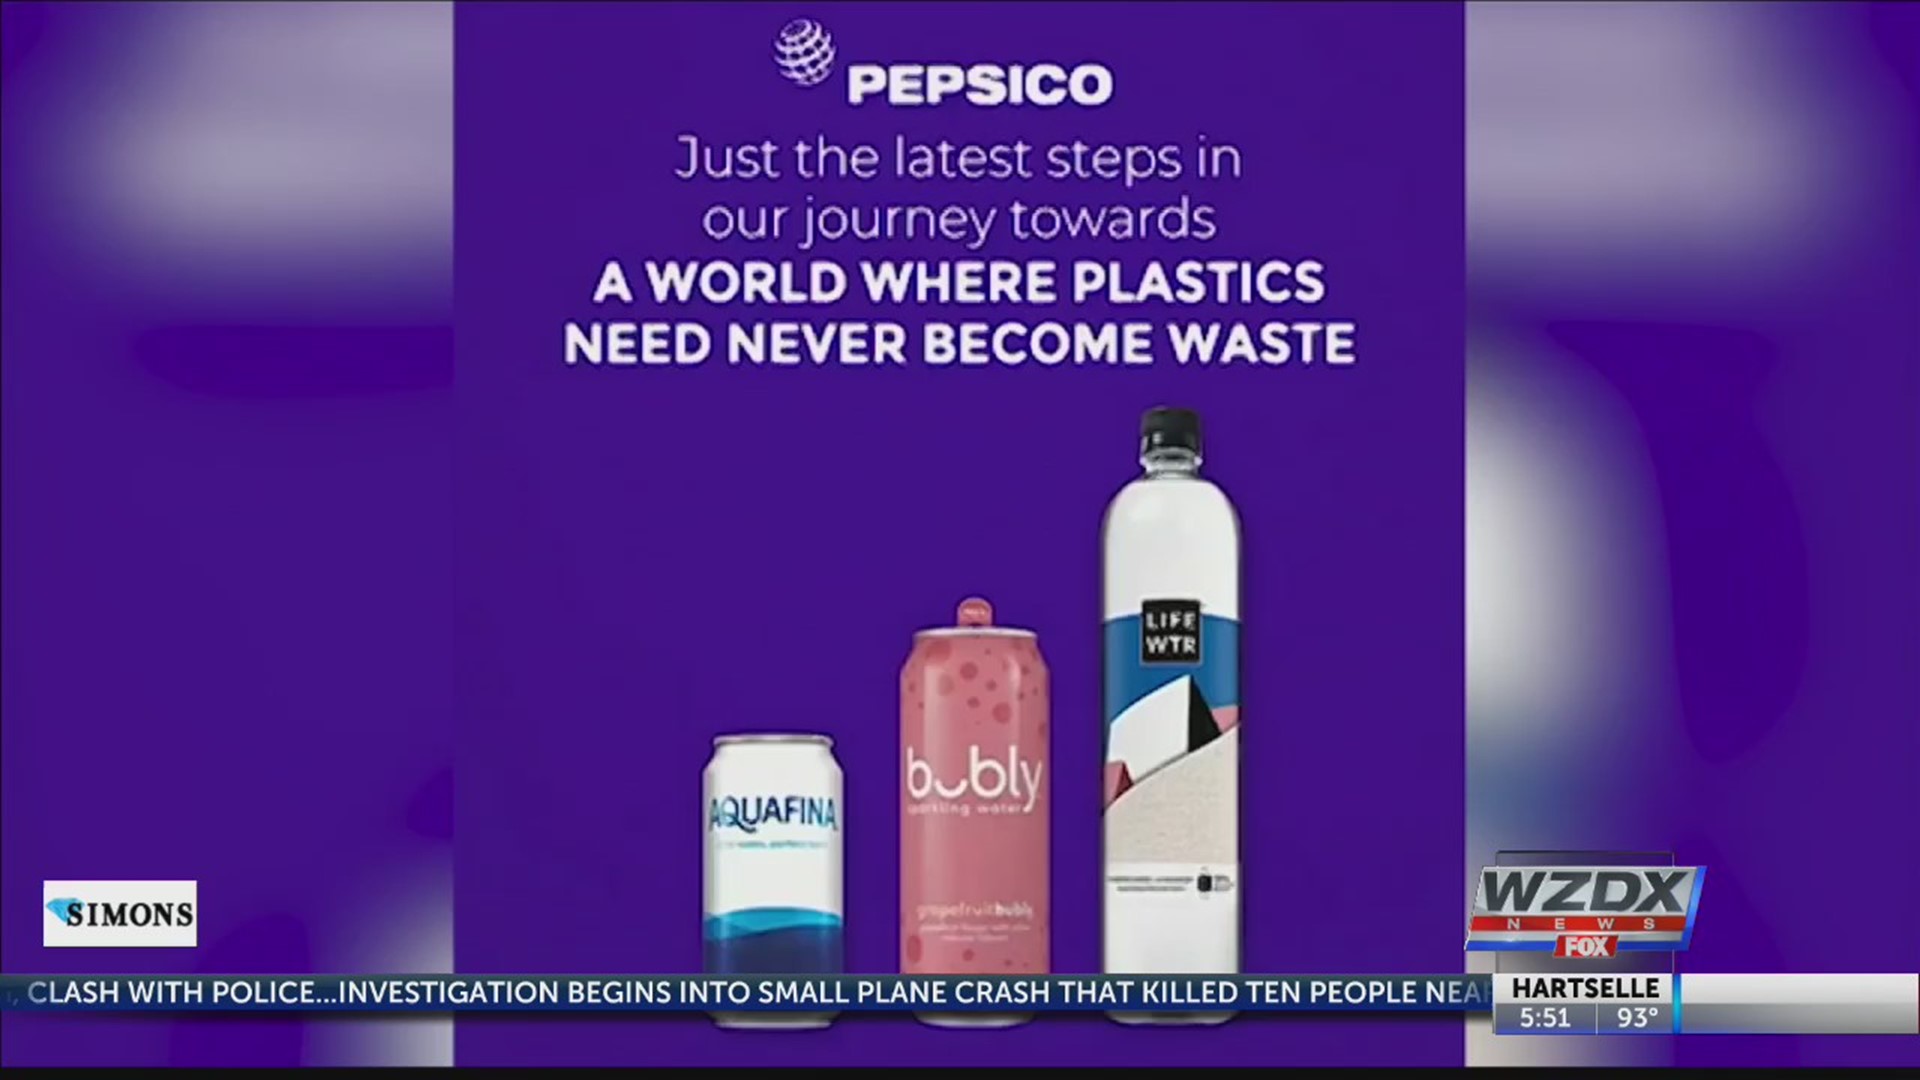 More trouble for Boeing, and Pepsi is taking a step to reduce plastic waste in landfills.